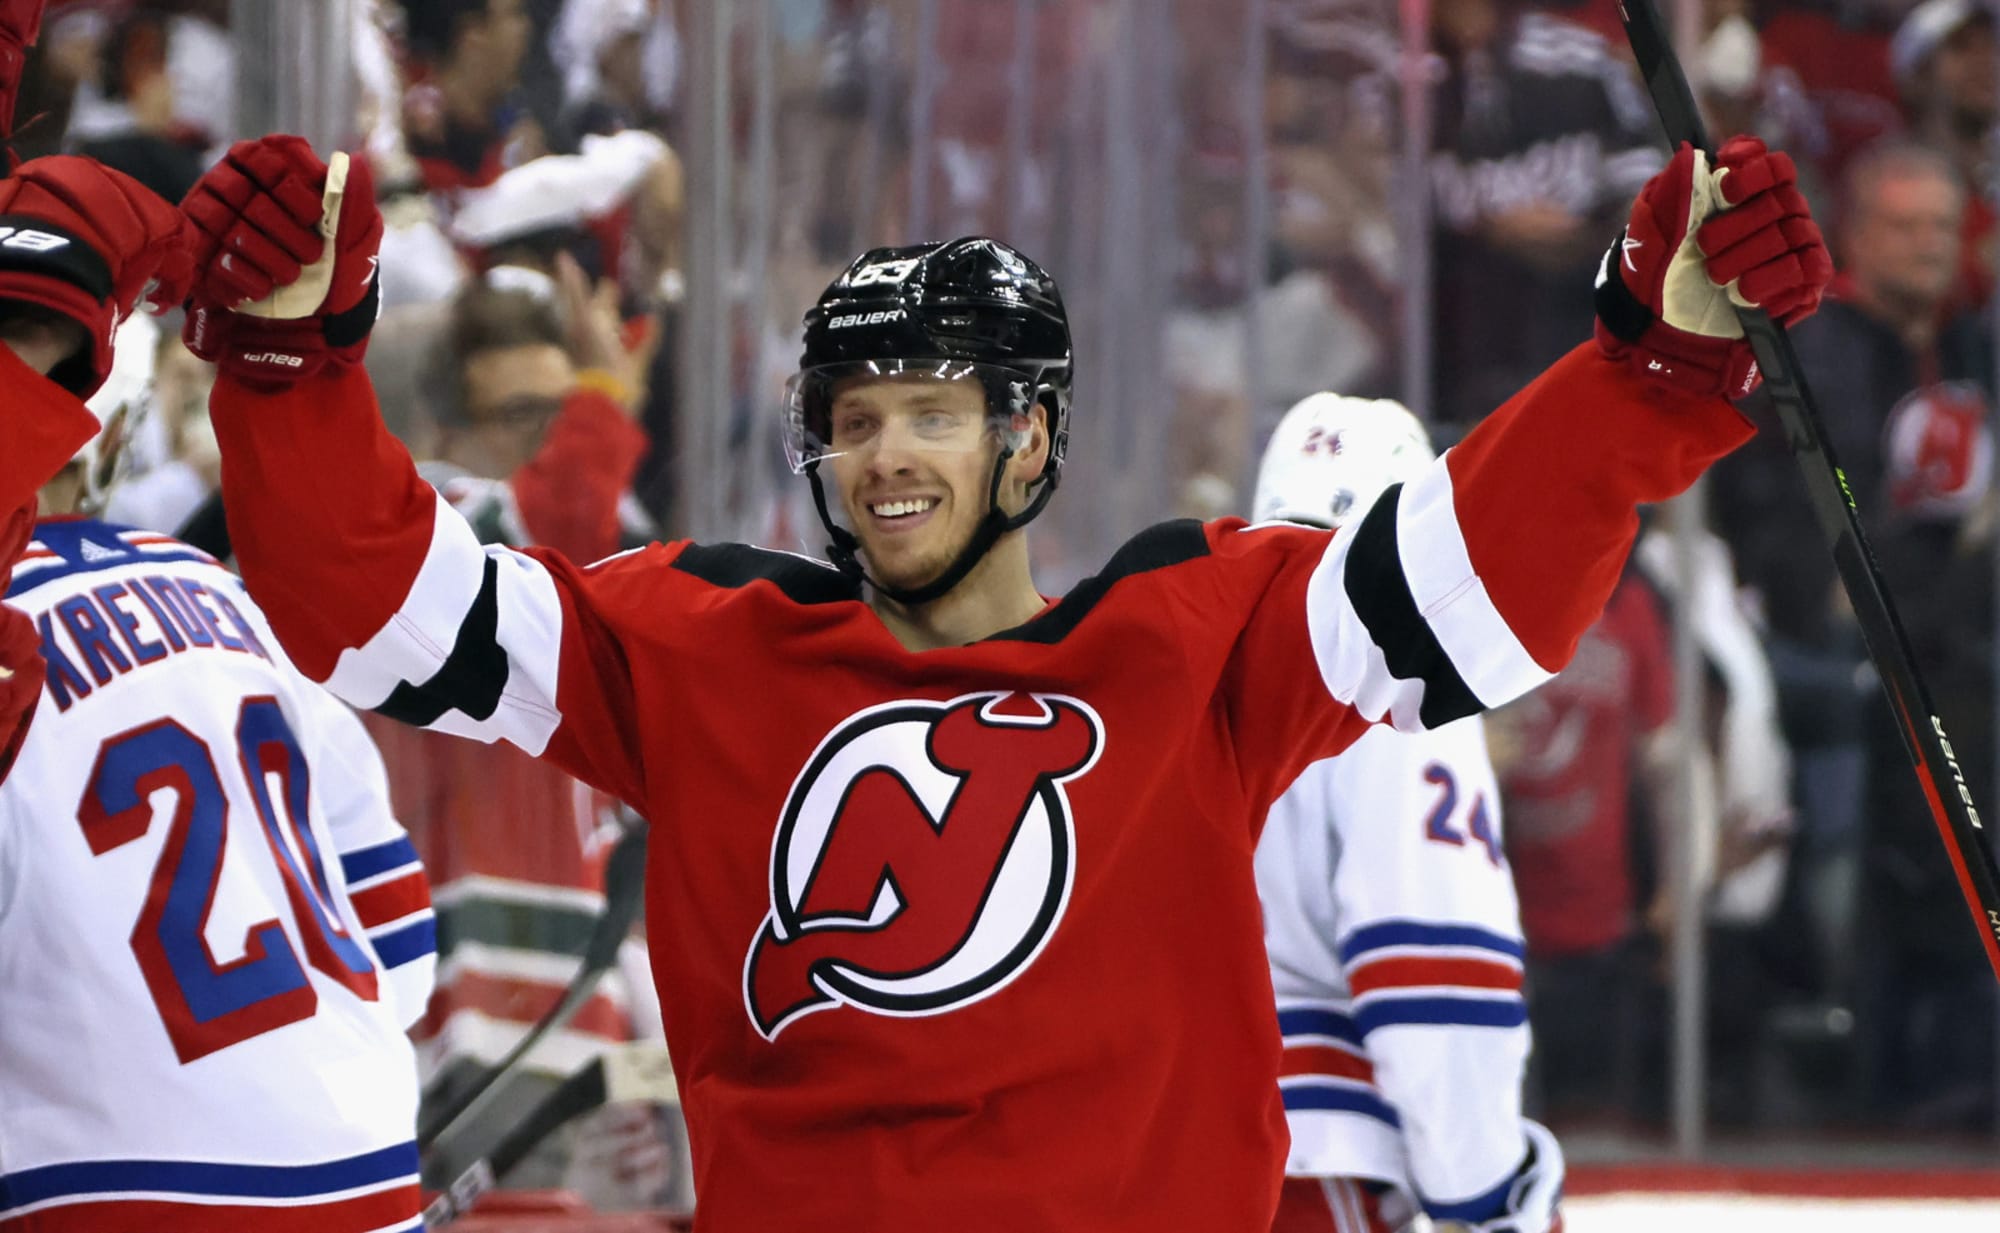 Rangers use power play to dominate Devils in Game 2 as series moves to New  York